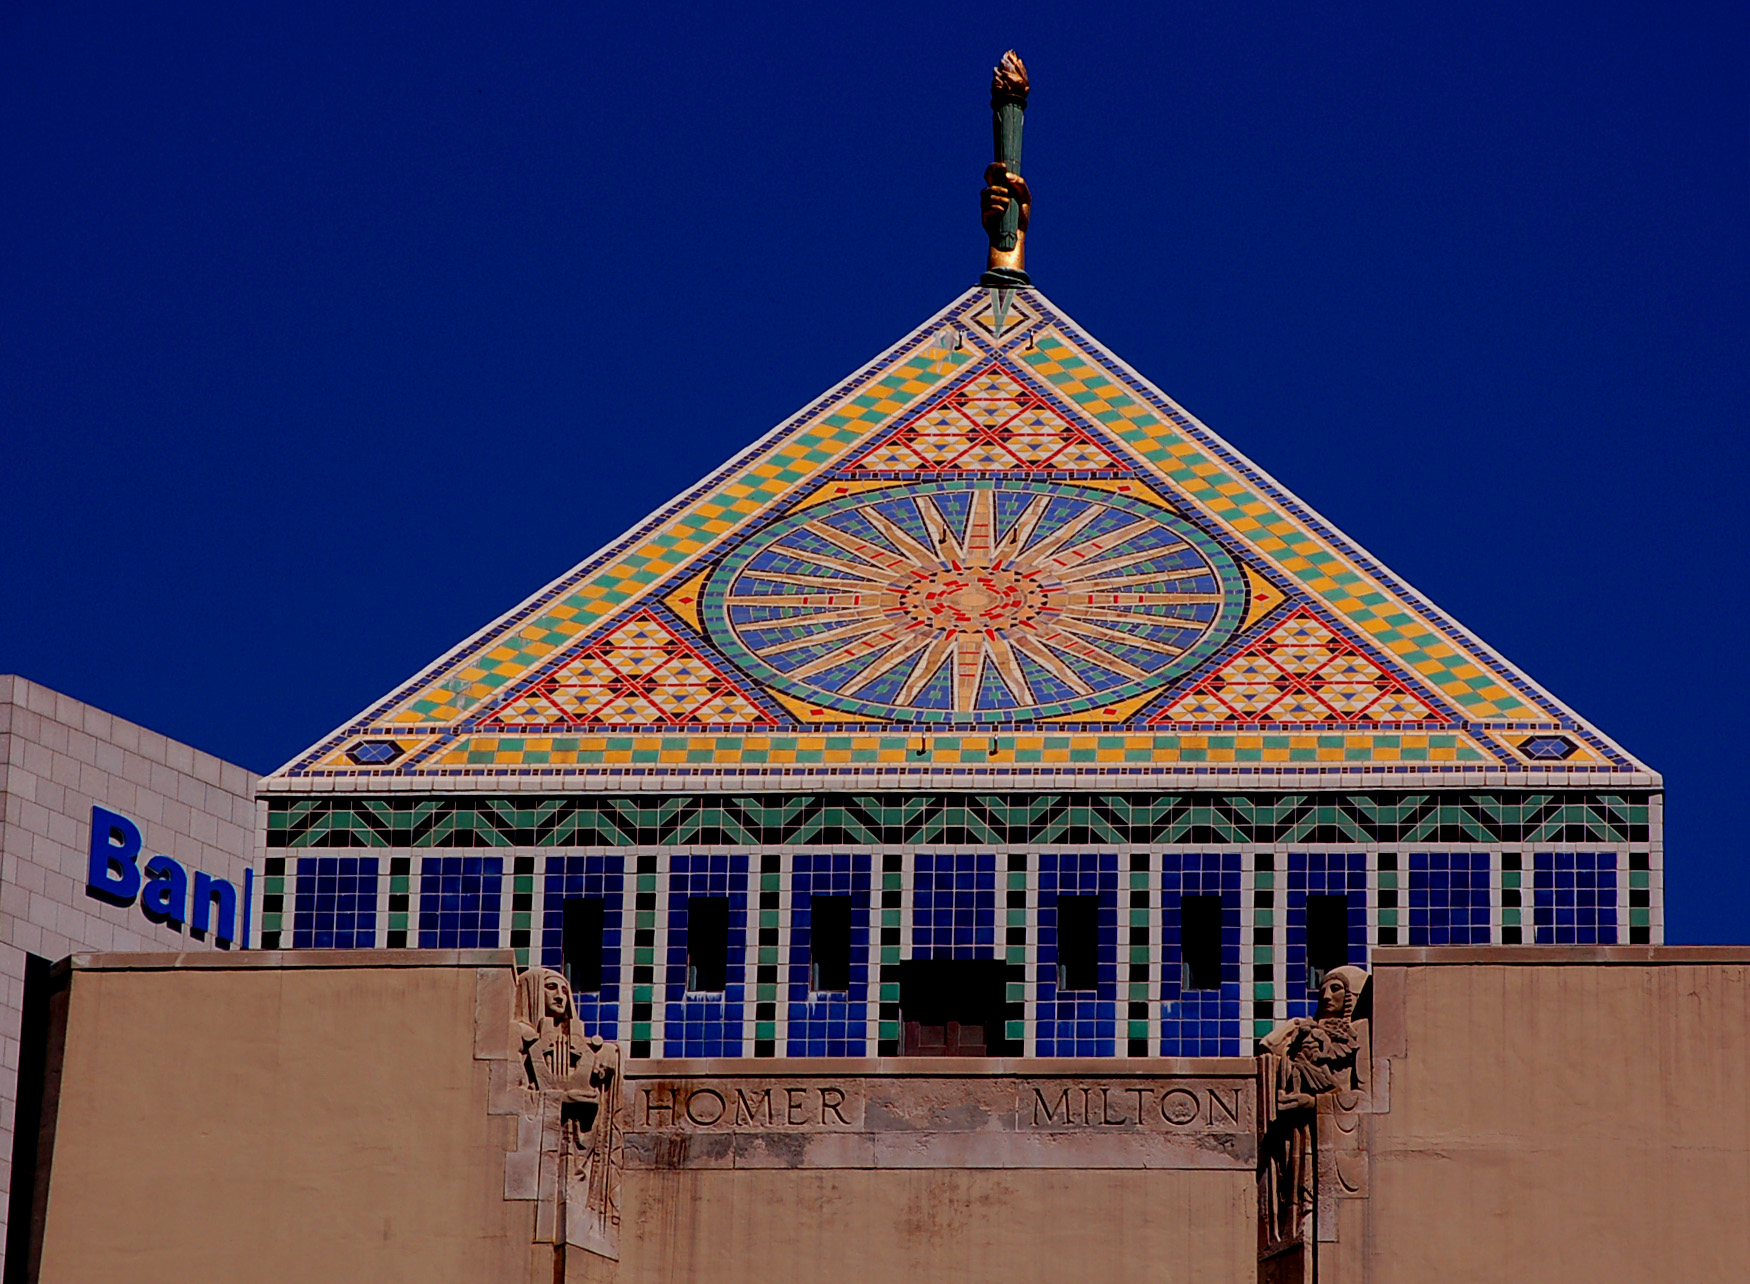 Pyramid roof of the central library covered in a bright mosaic against a blue sky